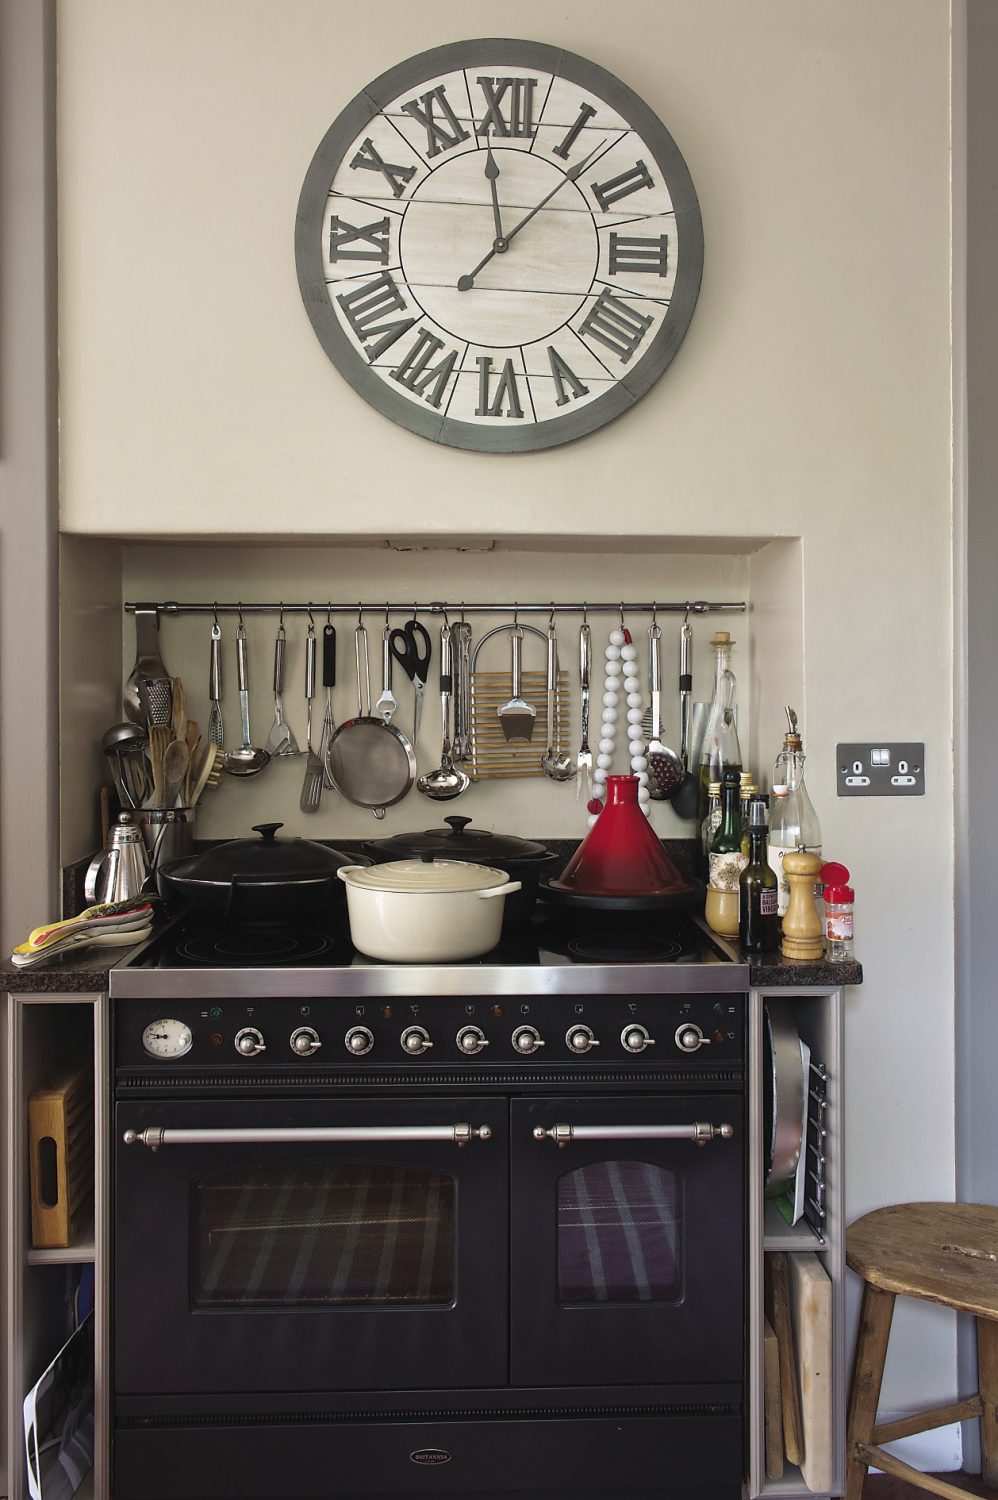 A large wooden clock with bold Roman numerals that was bought from Maison in Tunbridge Wells hangs above the wide black cooking range